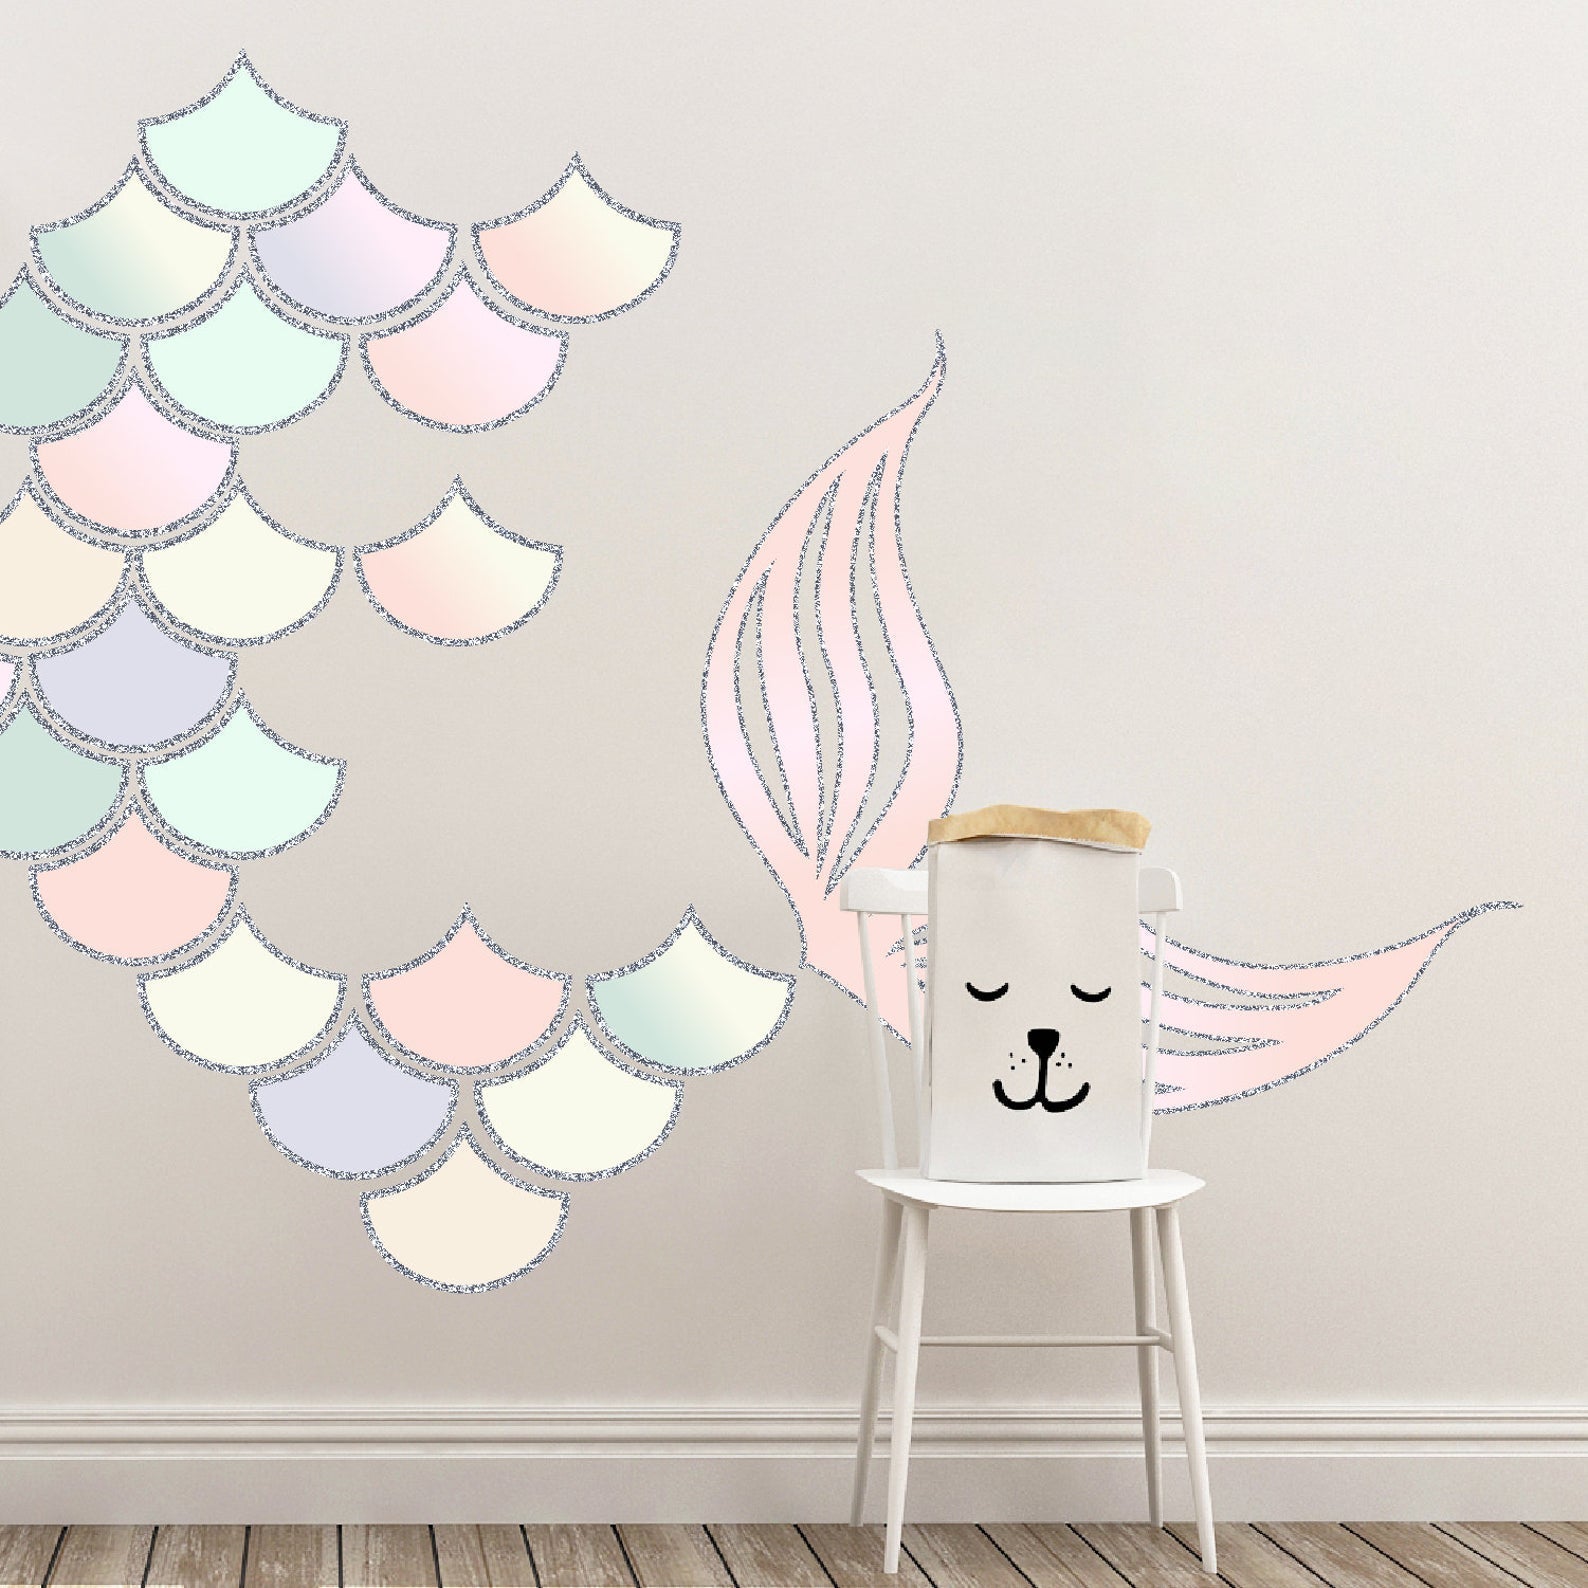 Mermaid Scales and Mermaid Tail Wall Decals | Purples and Blush - Picture Perfect Decals